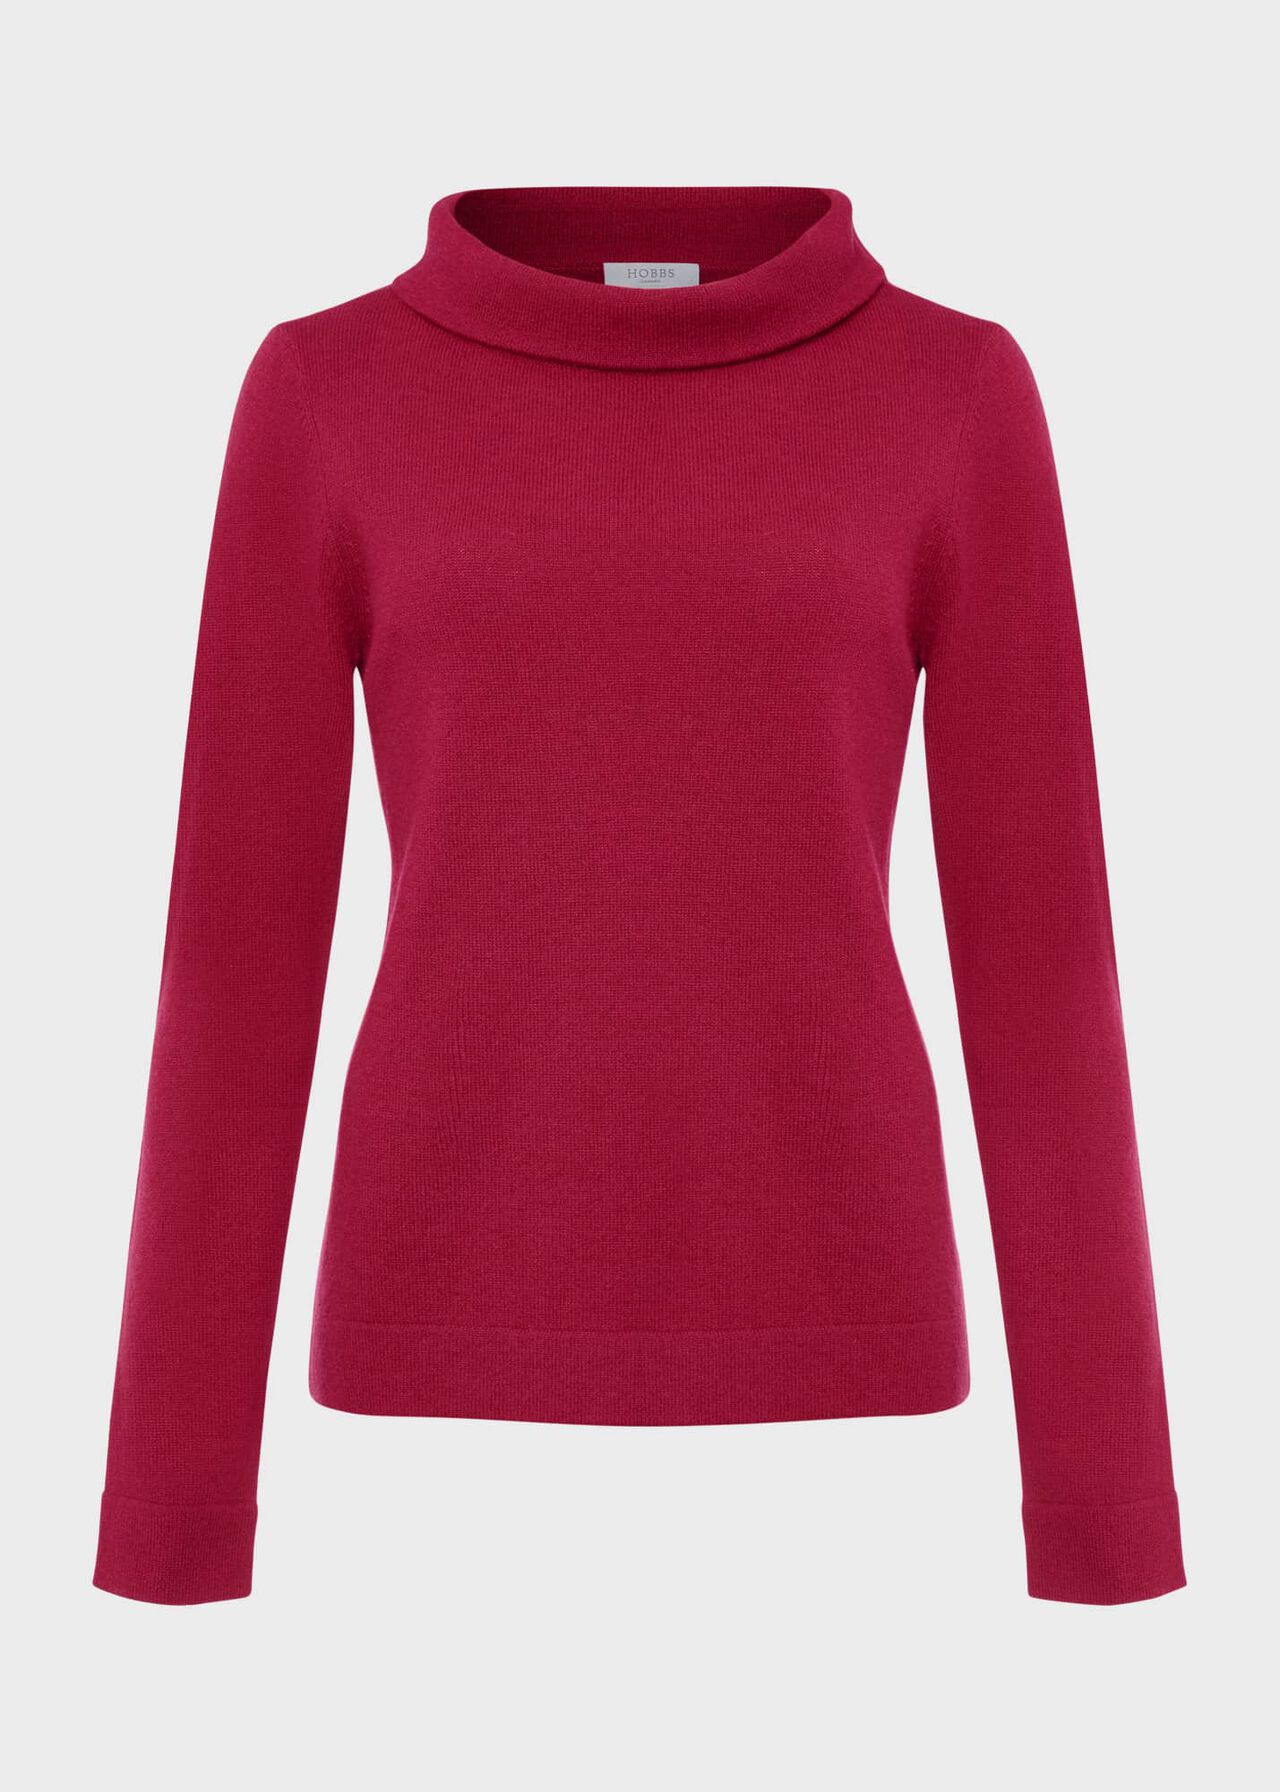 Audrey Wool Cashmere Sweater, Rich Berry Red, hi-res